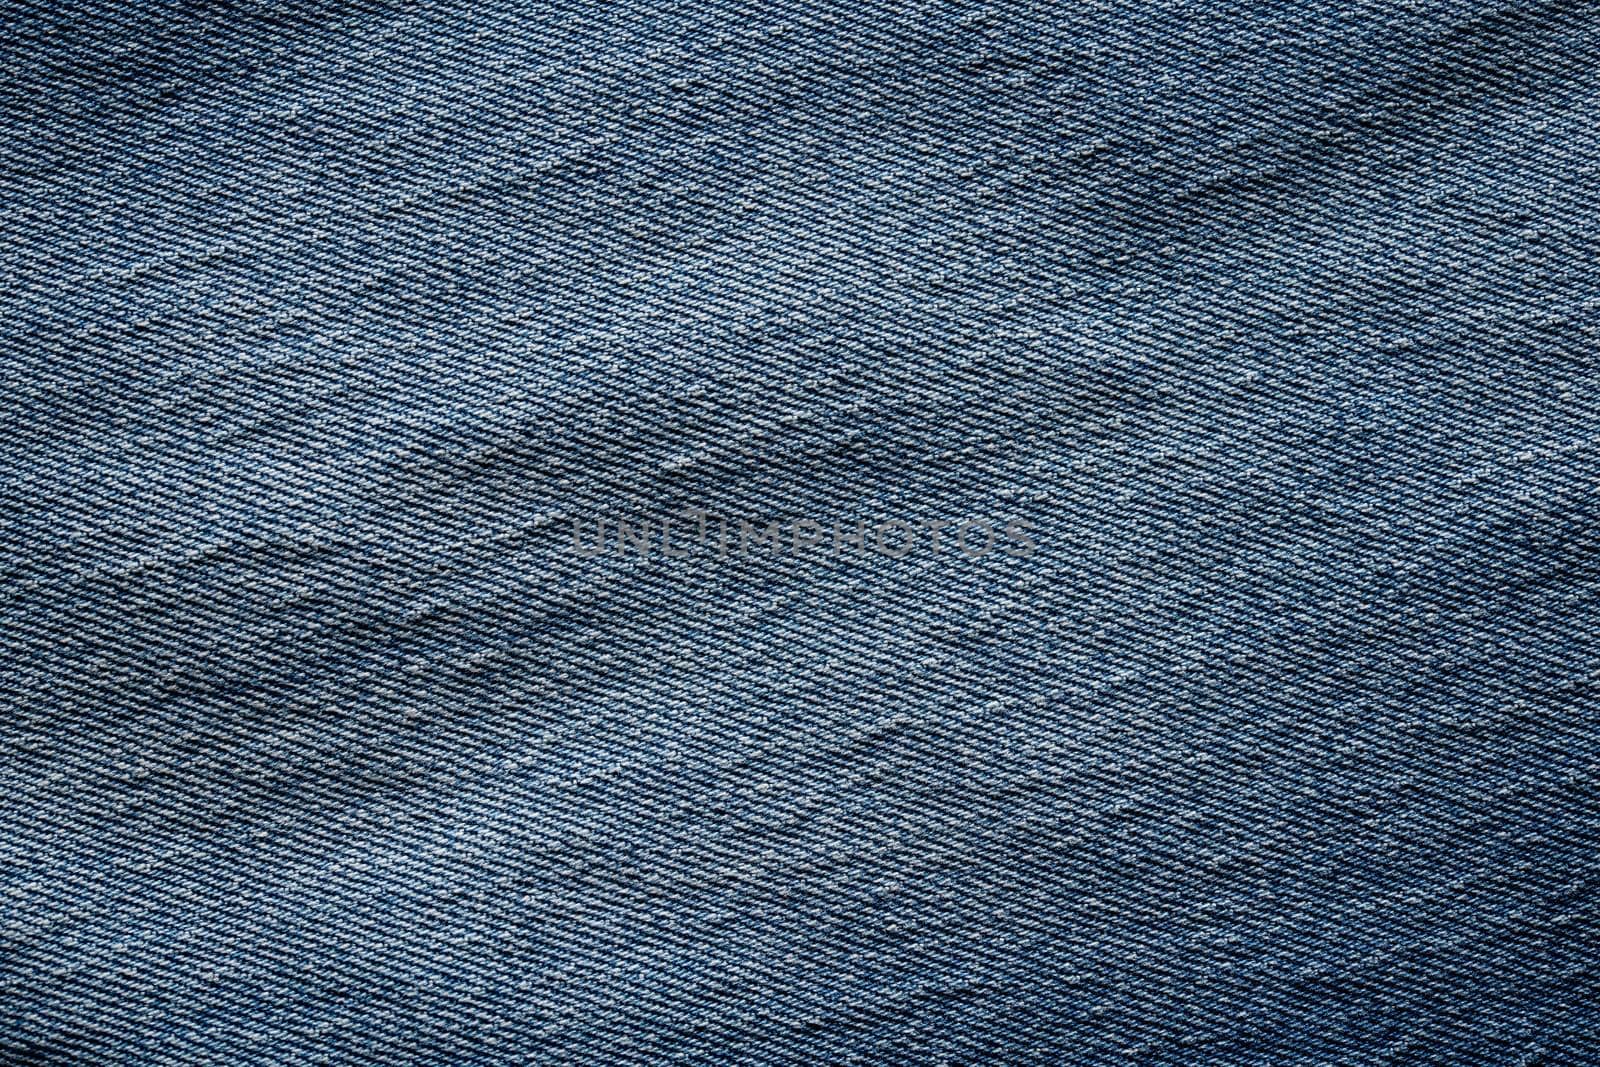 Ecological blue jeans that can be used as a background that completely covers the screen